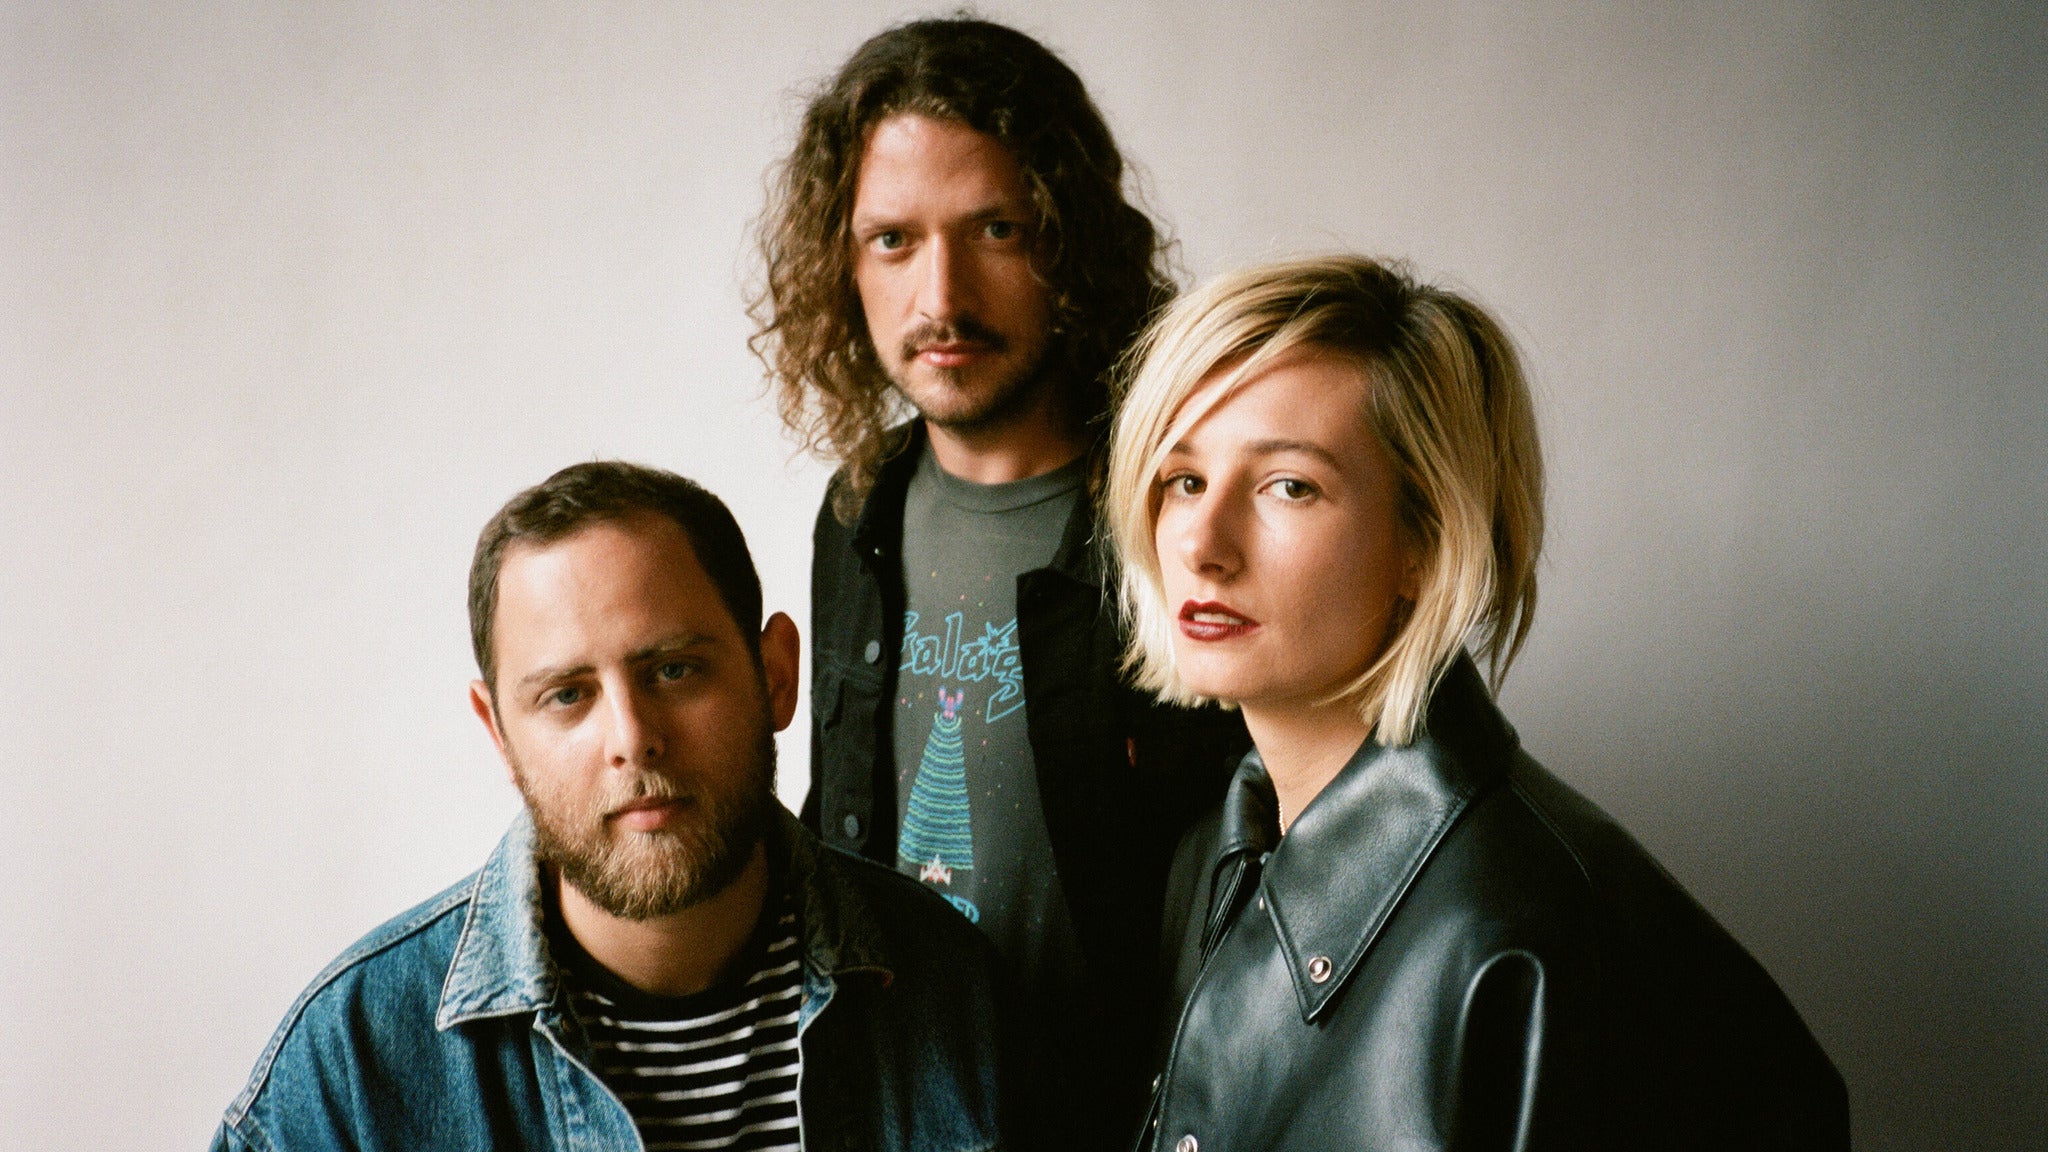 Slothrust in Minneapolis promo photo for Exclusive presale offer code